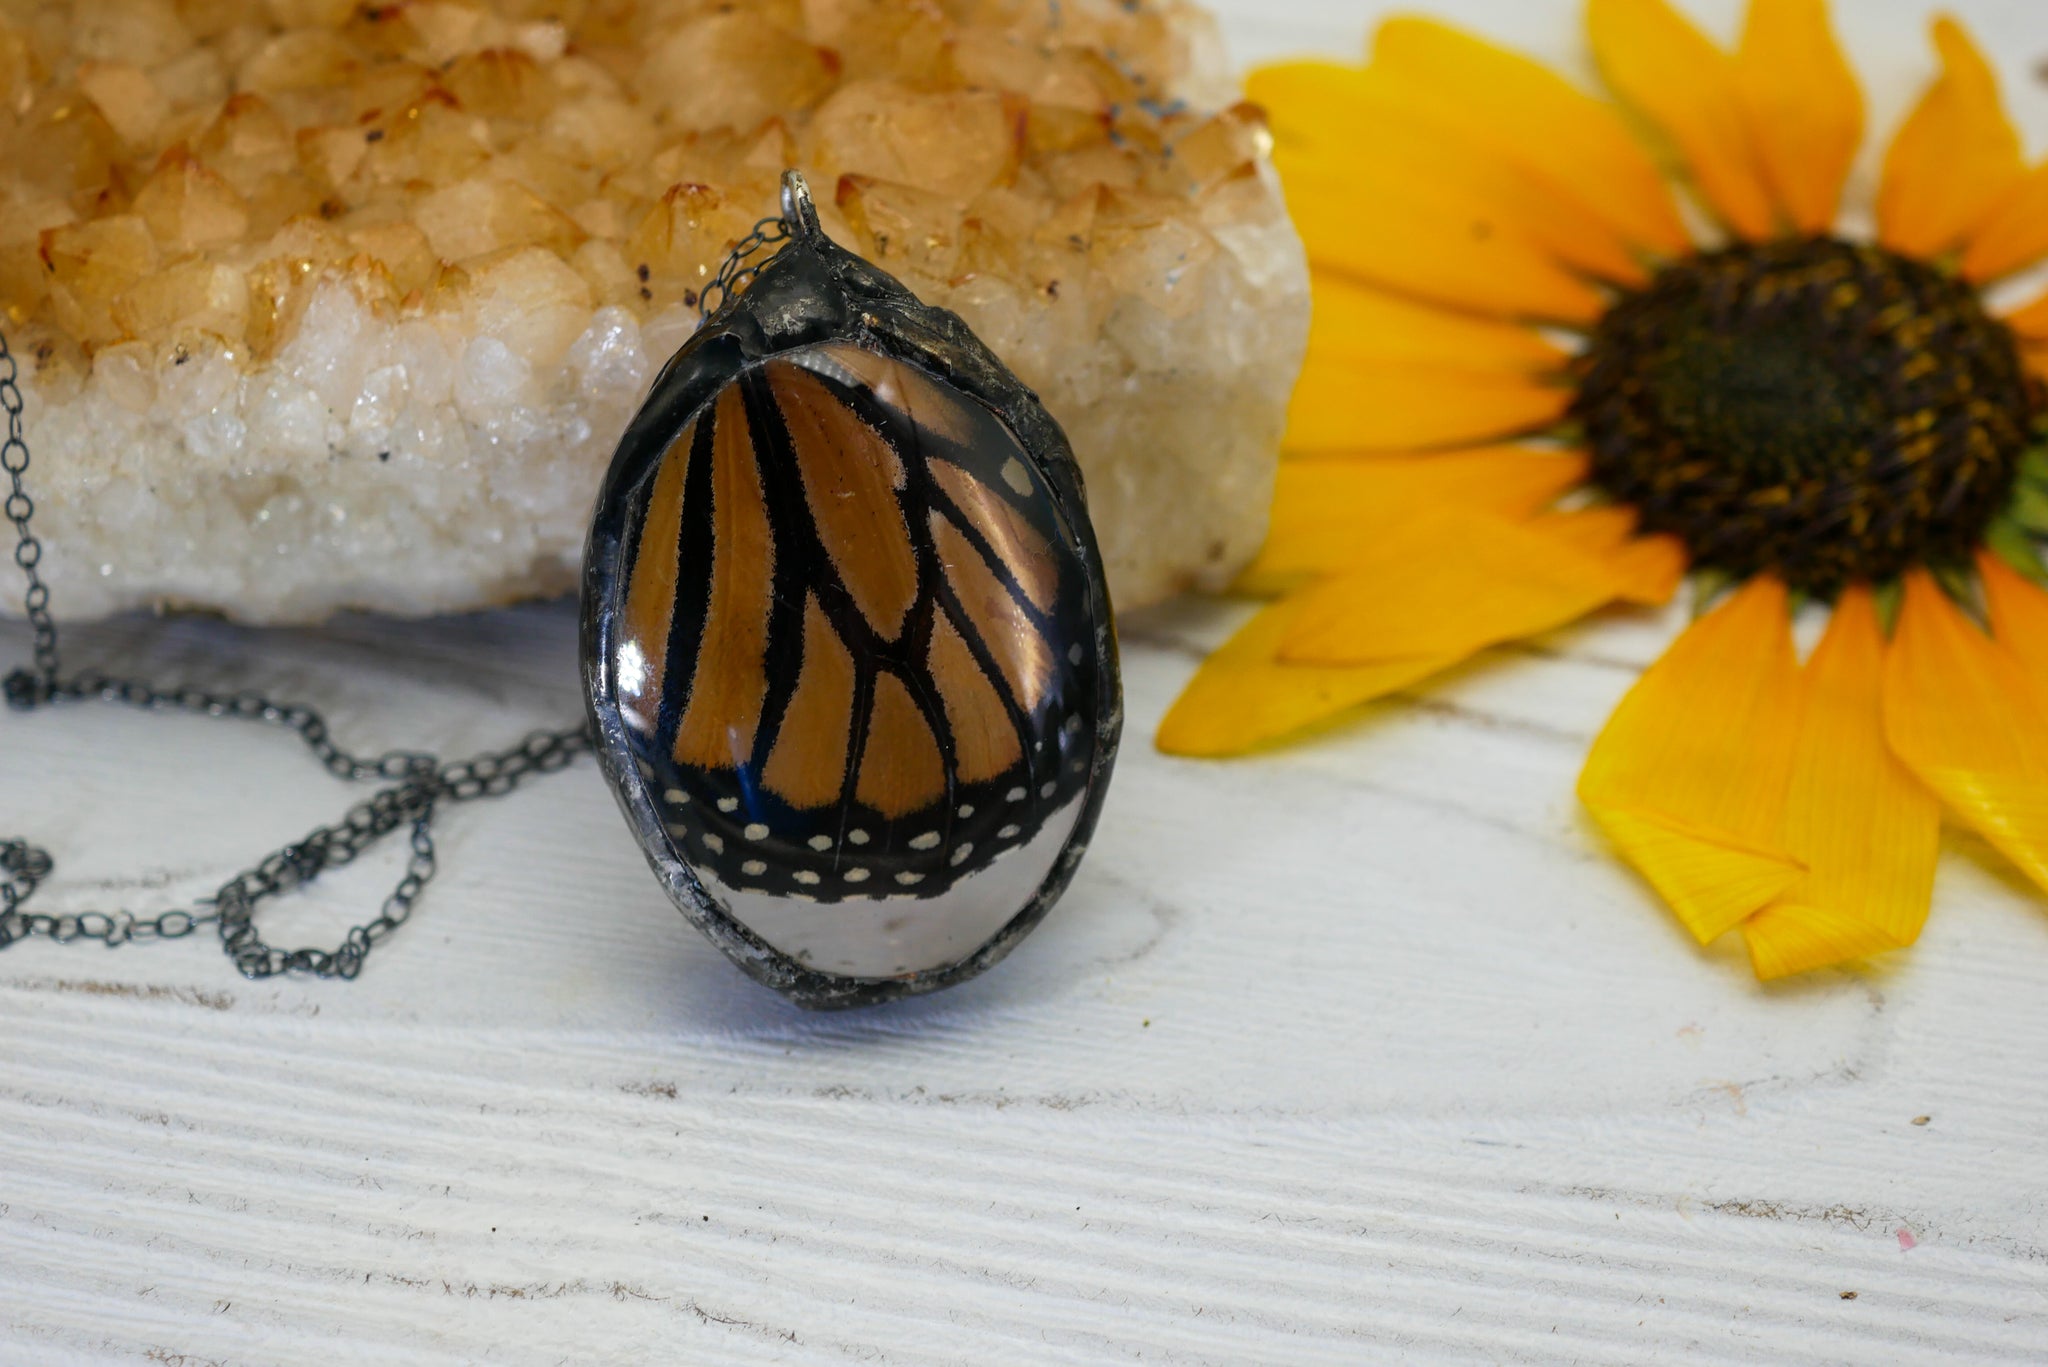 Monarch butterfly wing necklace